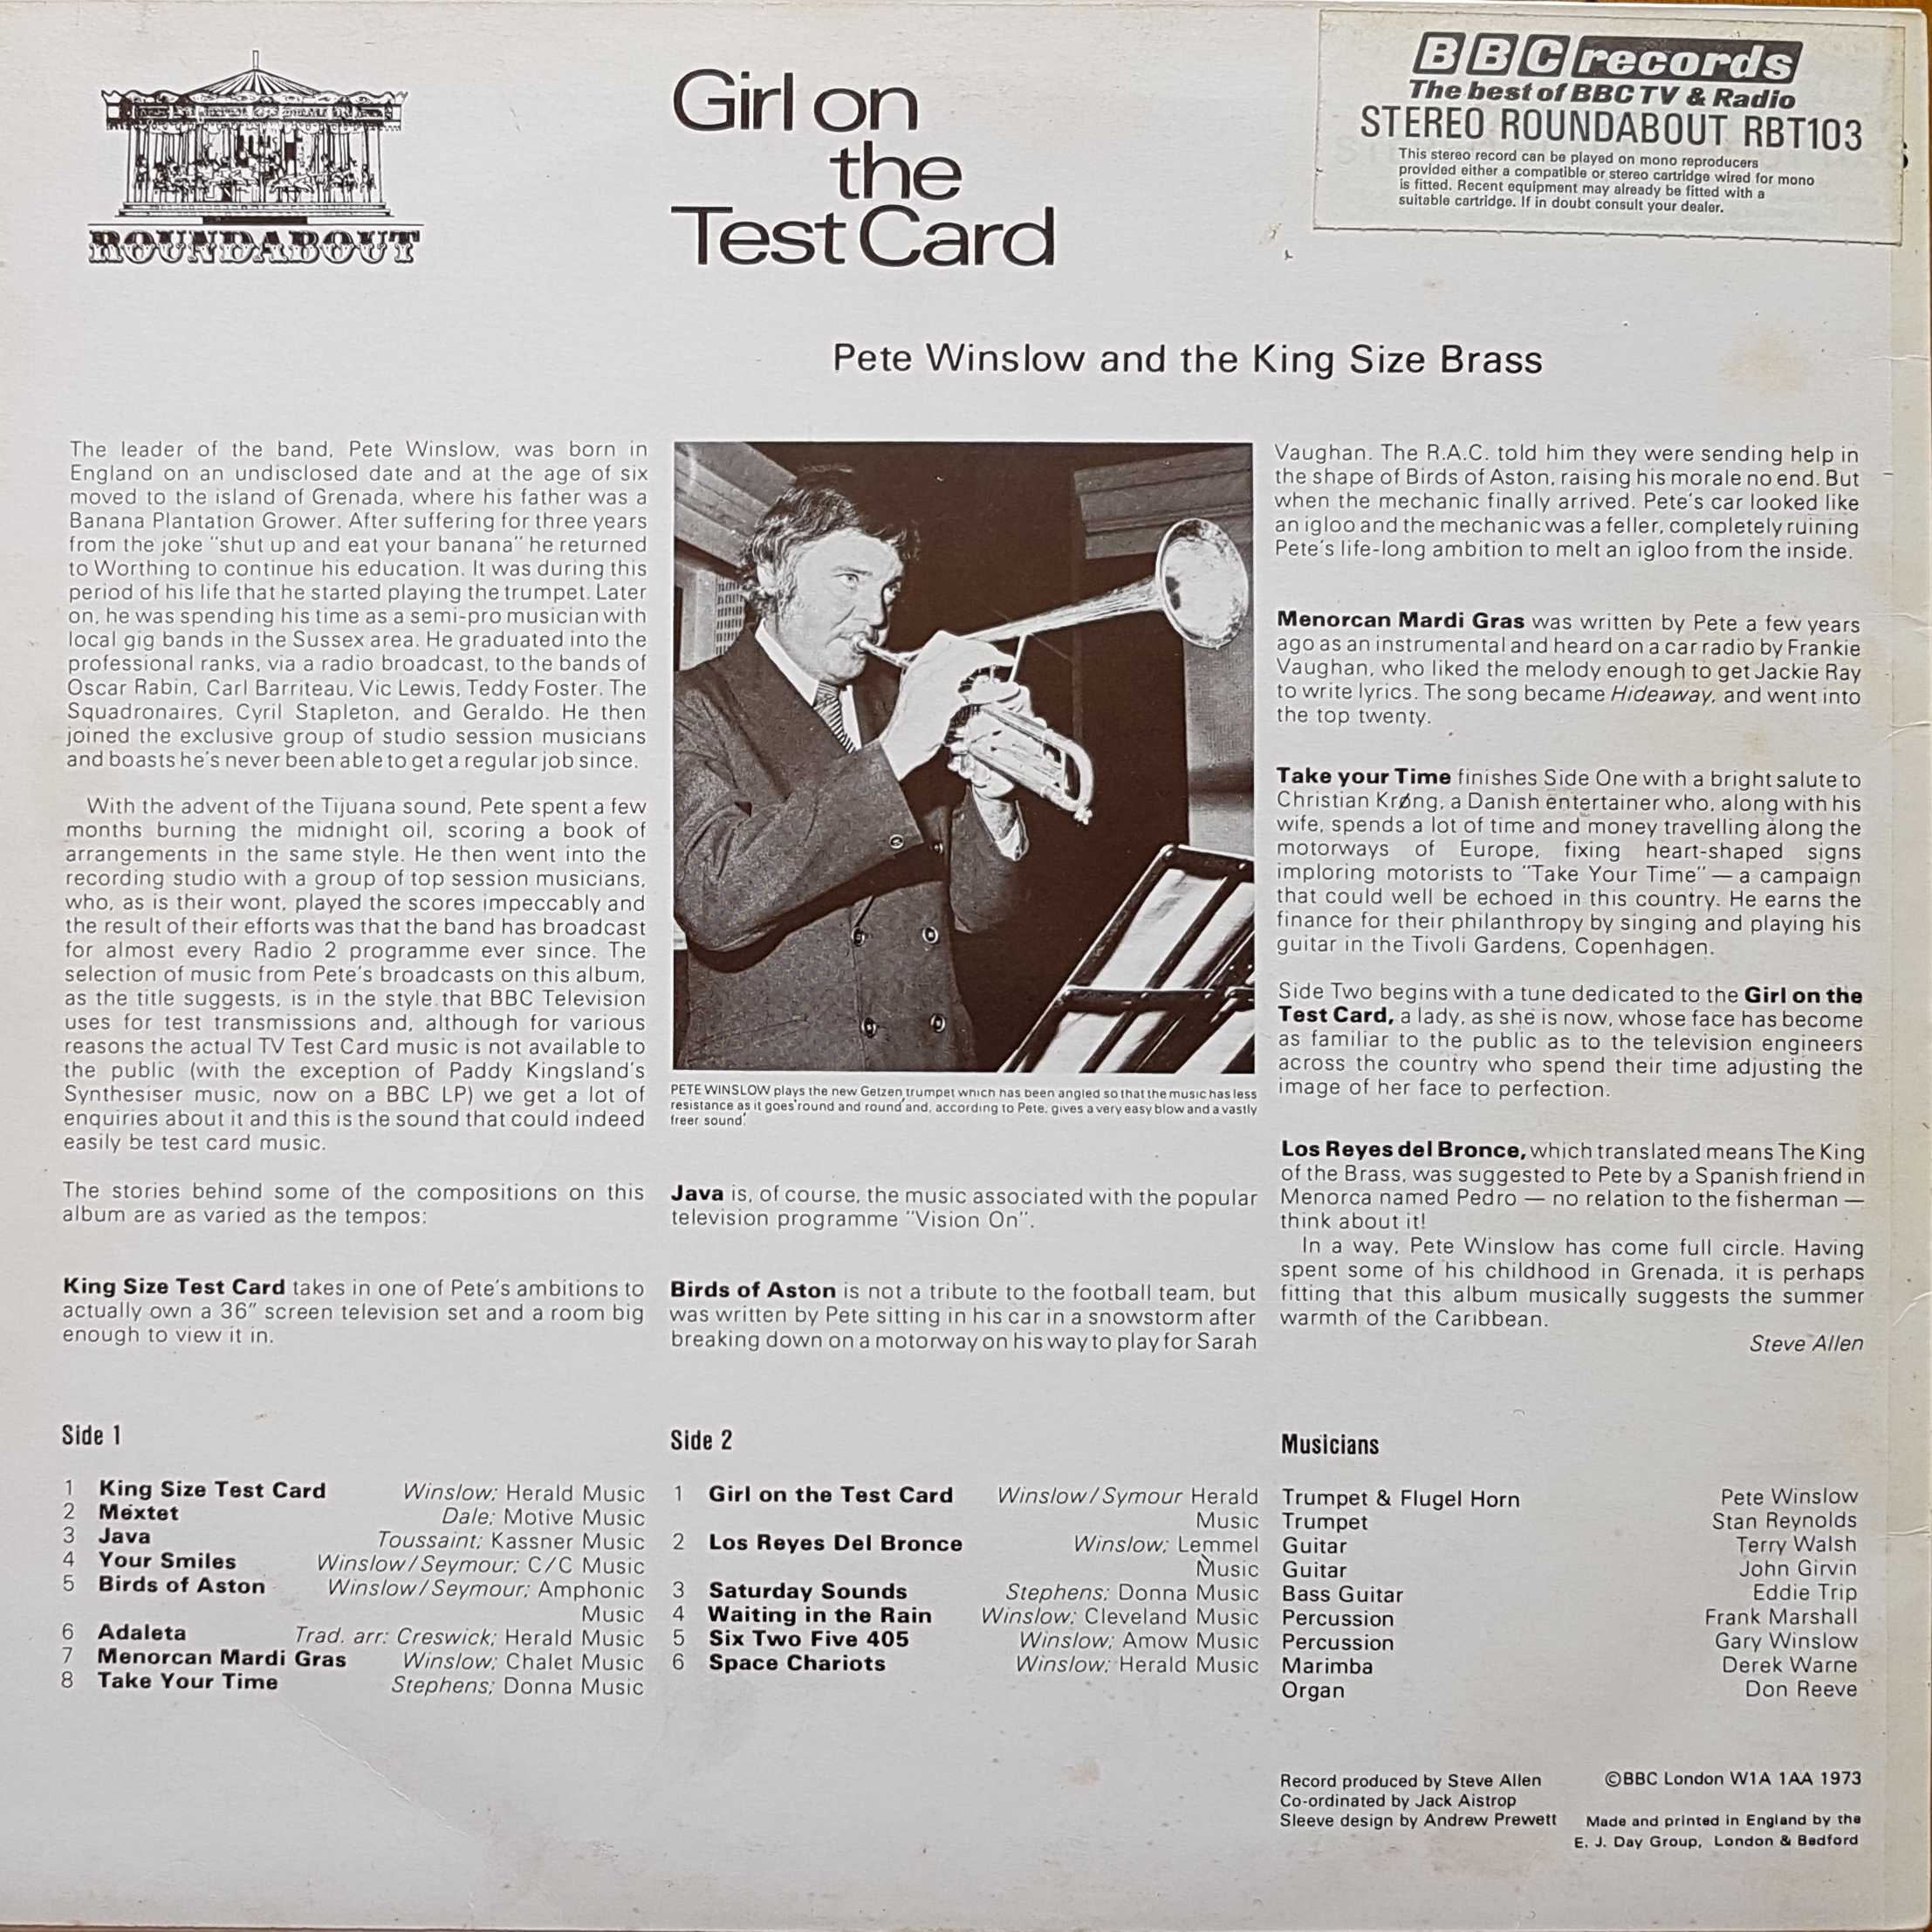 Back cover of RBT 103